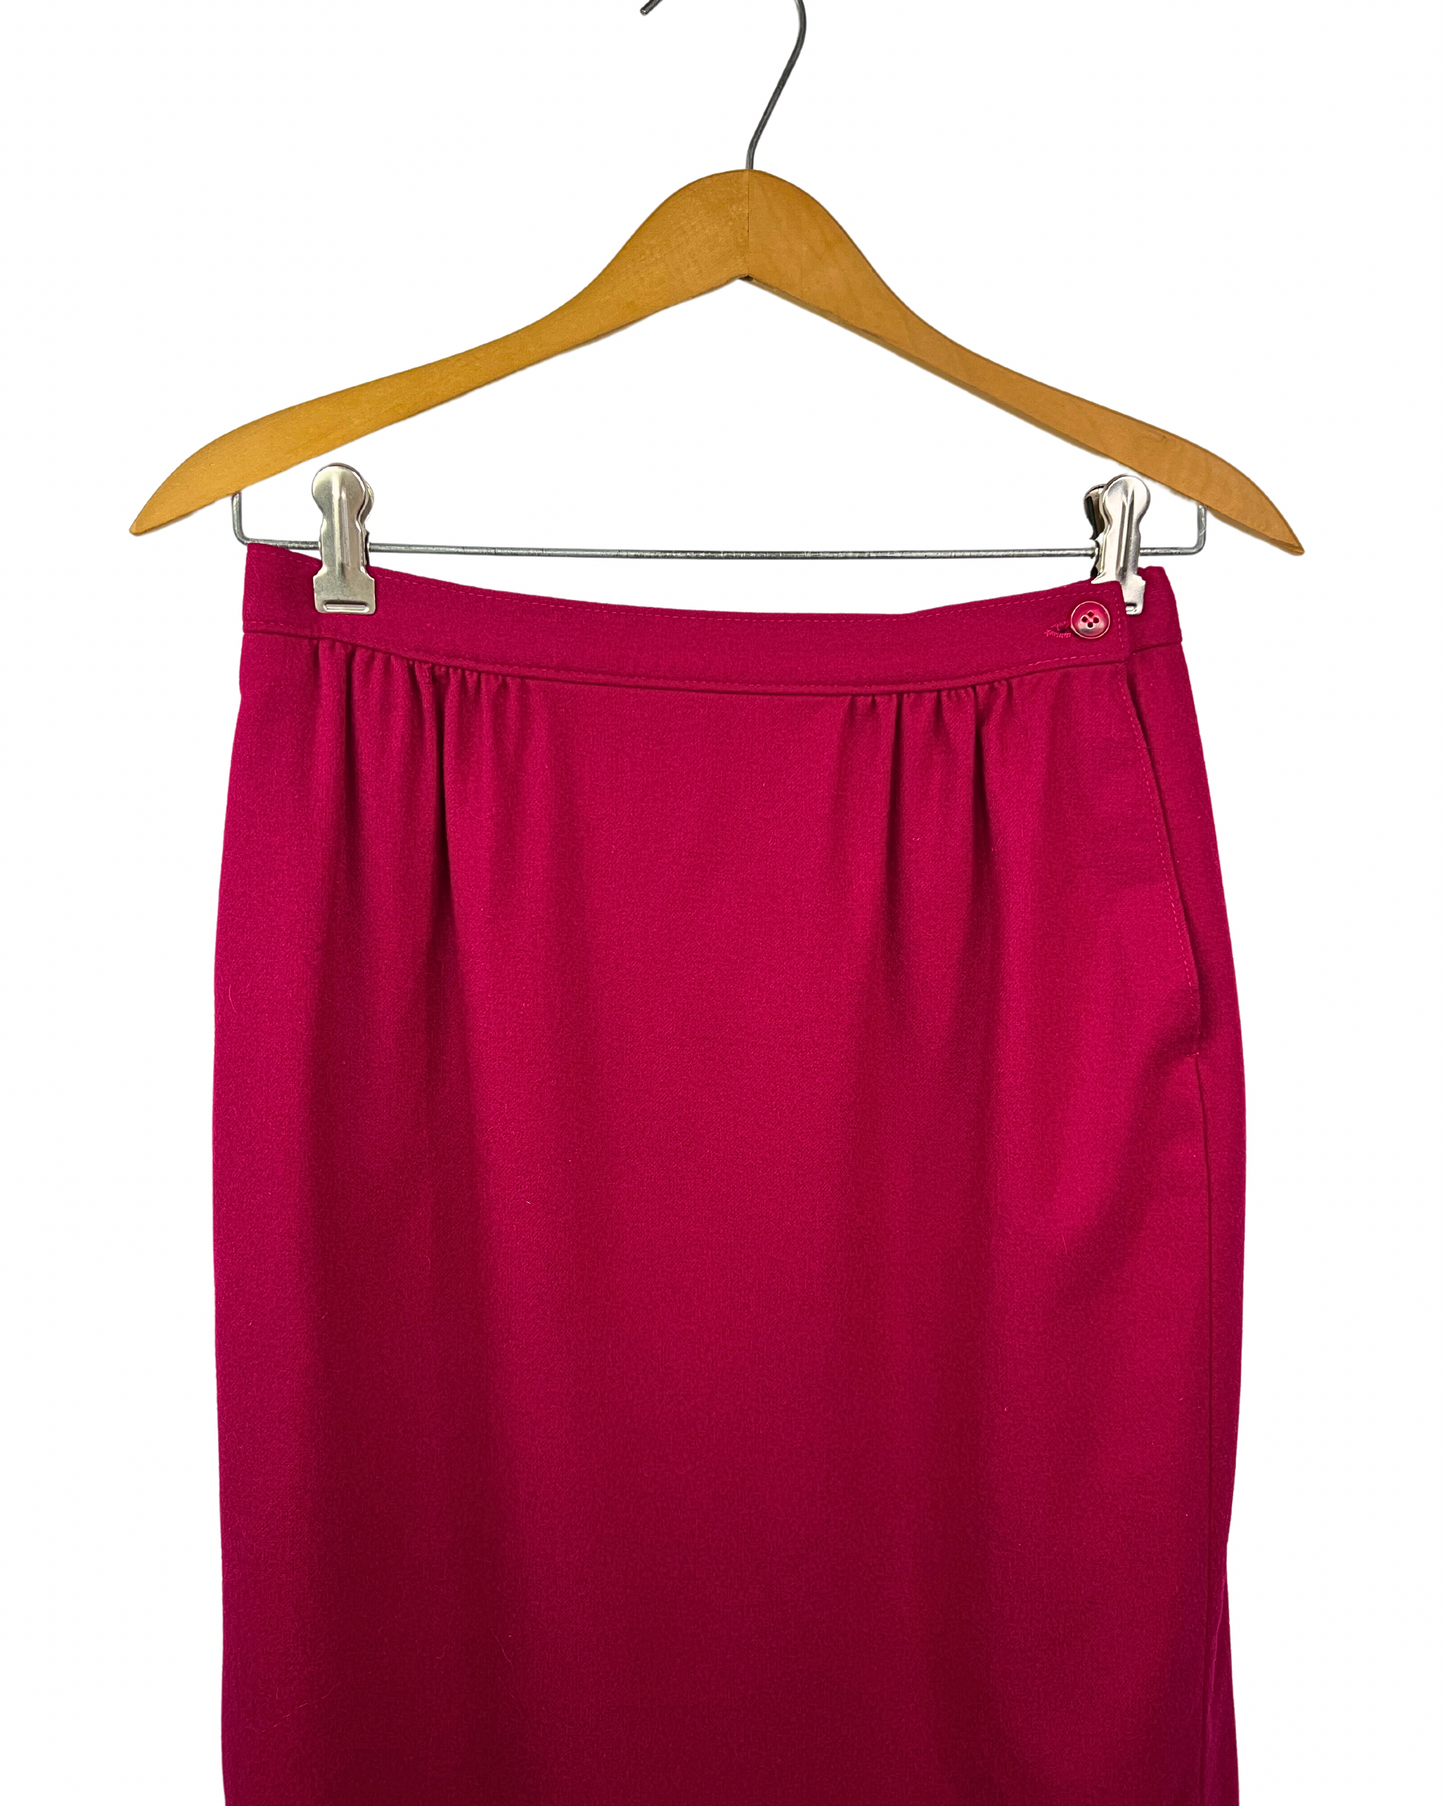 60’s Pendleton Wool Fuchsia Pink Pencil Skirt with Pockets Size 10 (28)